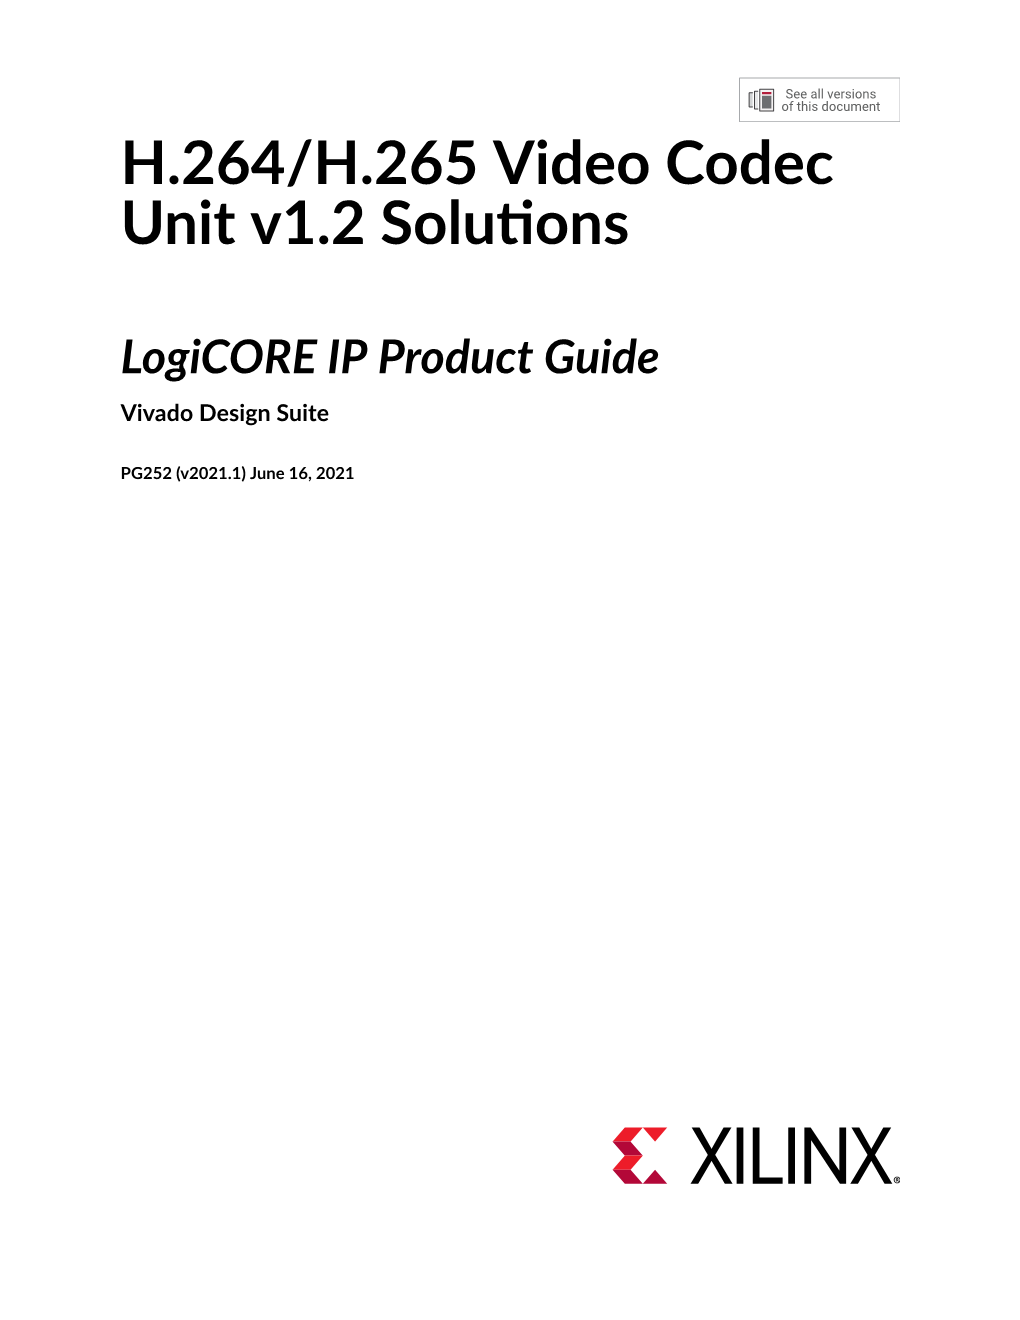 H.264/H.265 Video Codec Unit V1.2 Logicore IP Product Guide